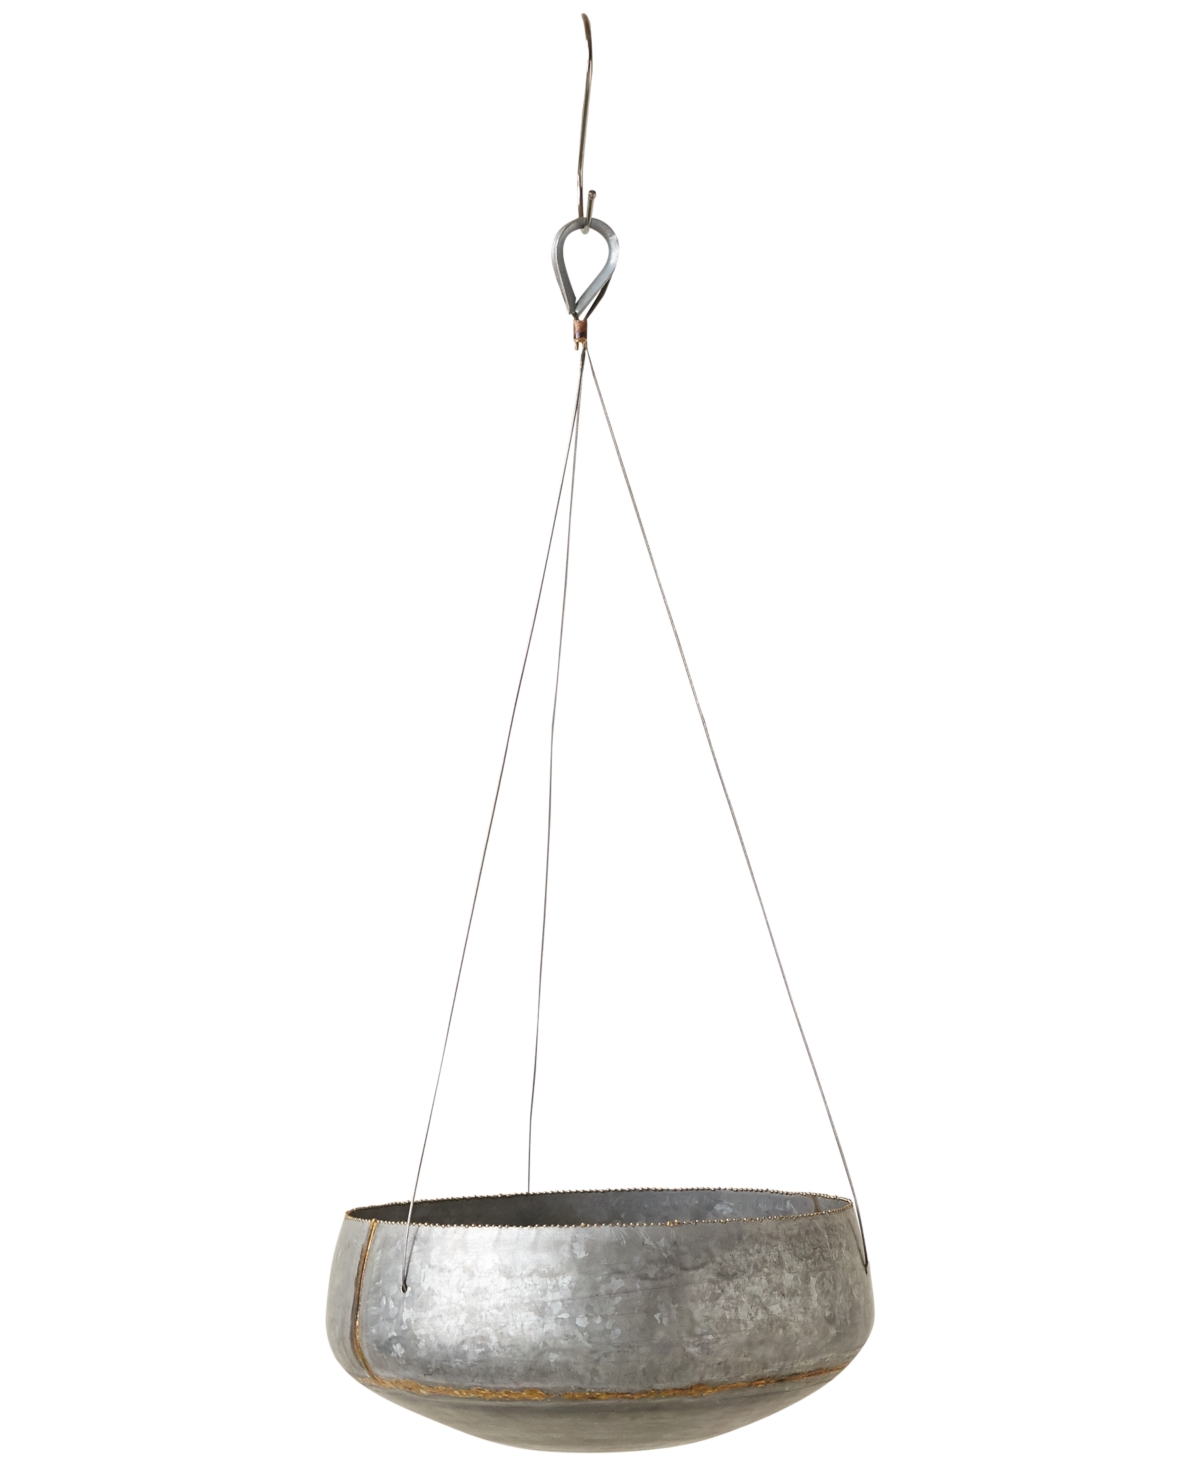 Round Galvanized Metal Hanging Planter, Silver and Gold - Silver